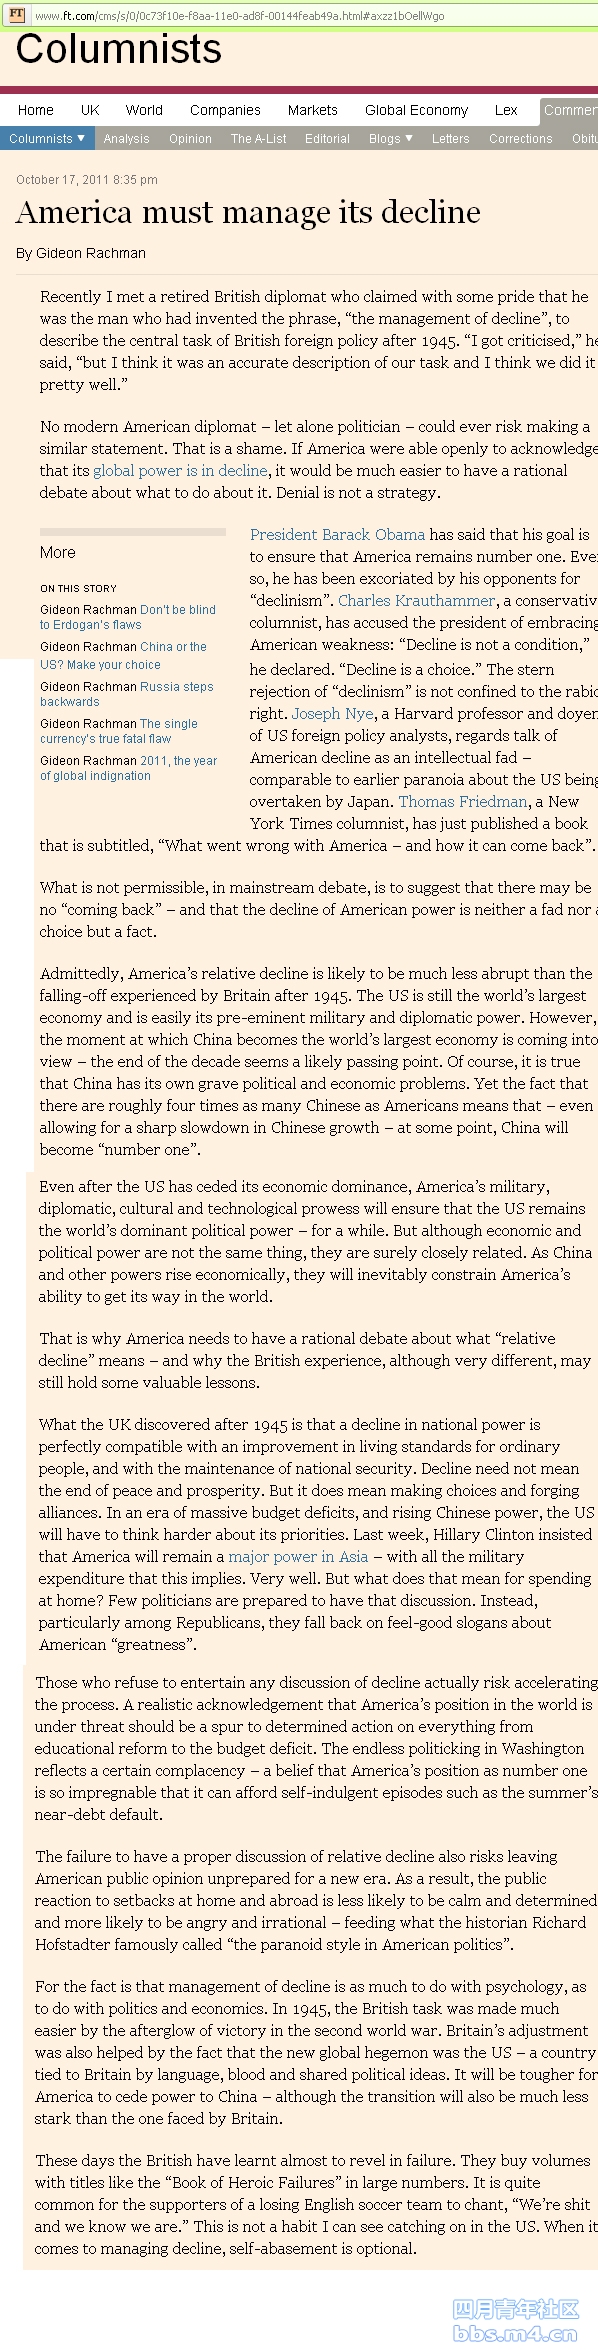 America must manage its decline_FT_2011_Oct_17_01.jpg